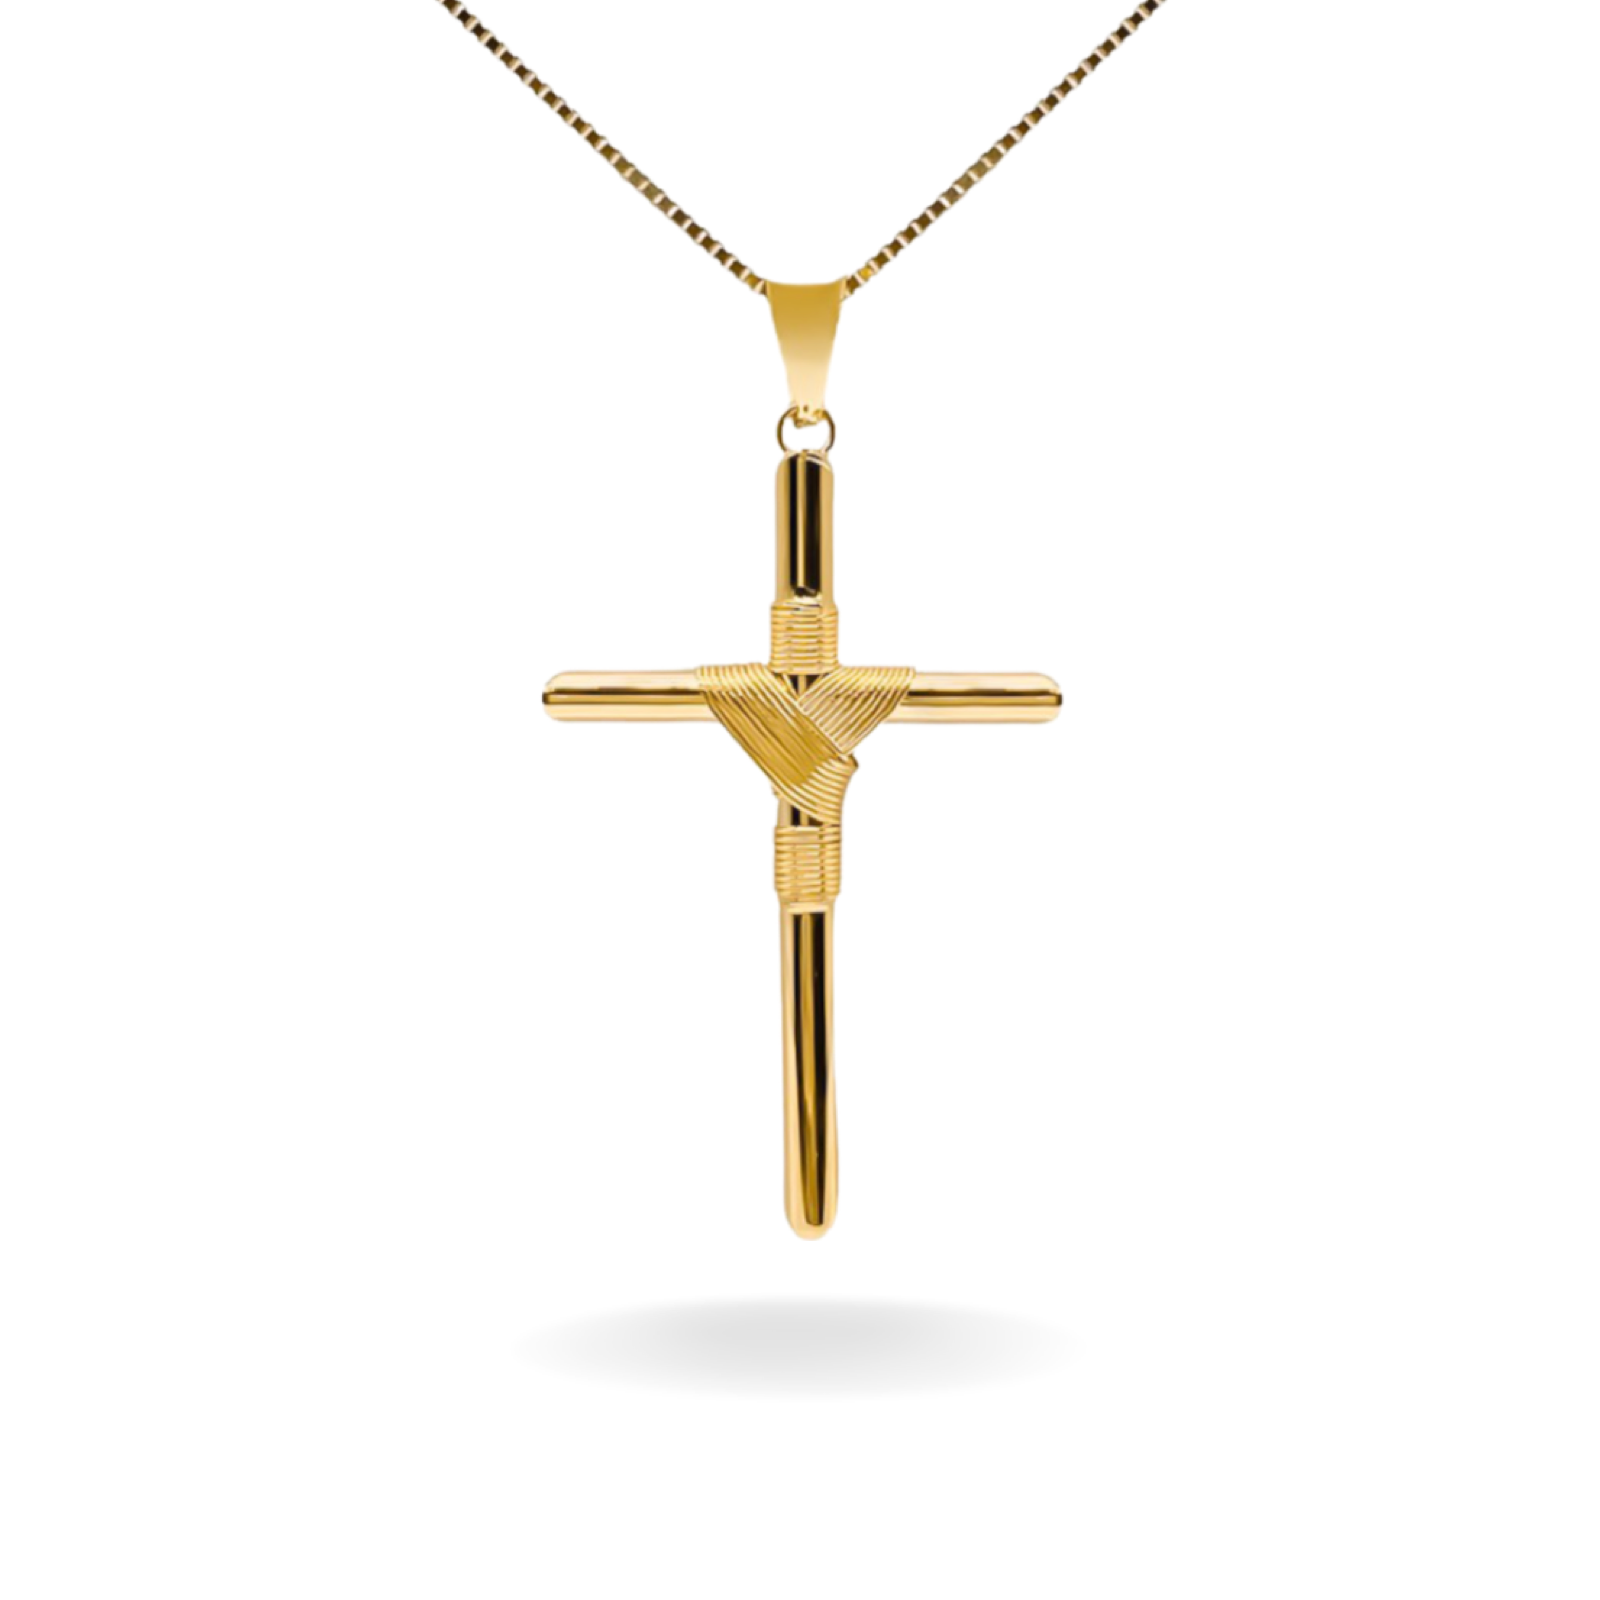 14K YELLOW GOLD WRAPPED CROSS NECKLACE